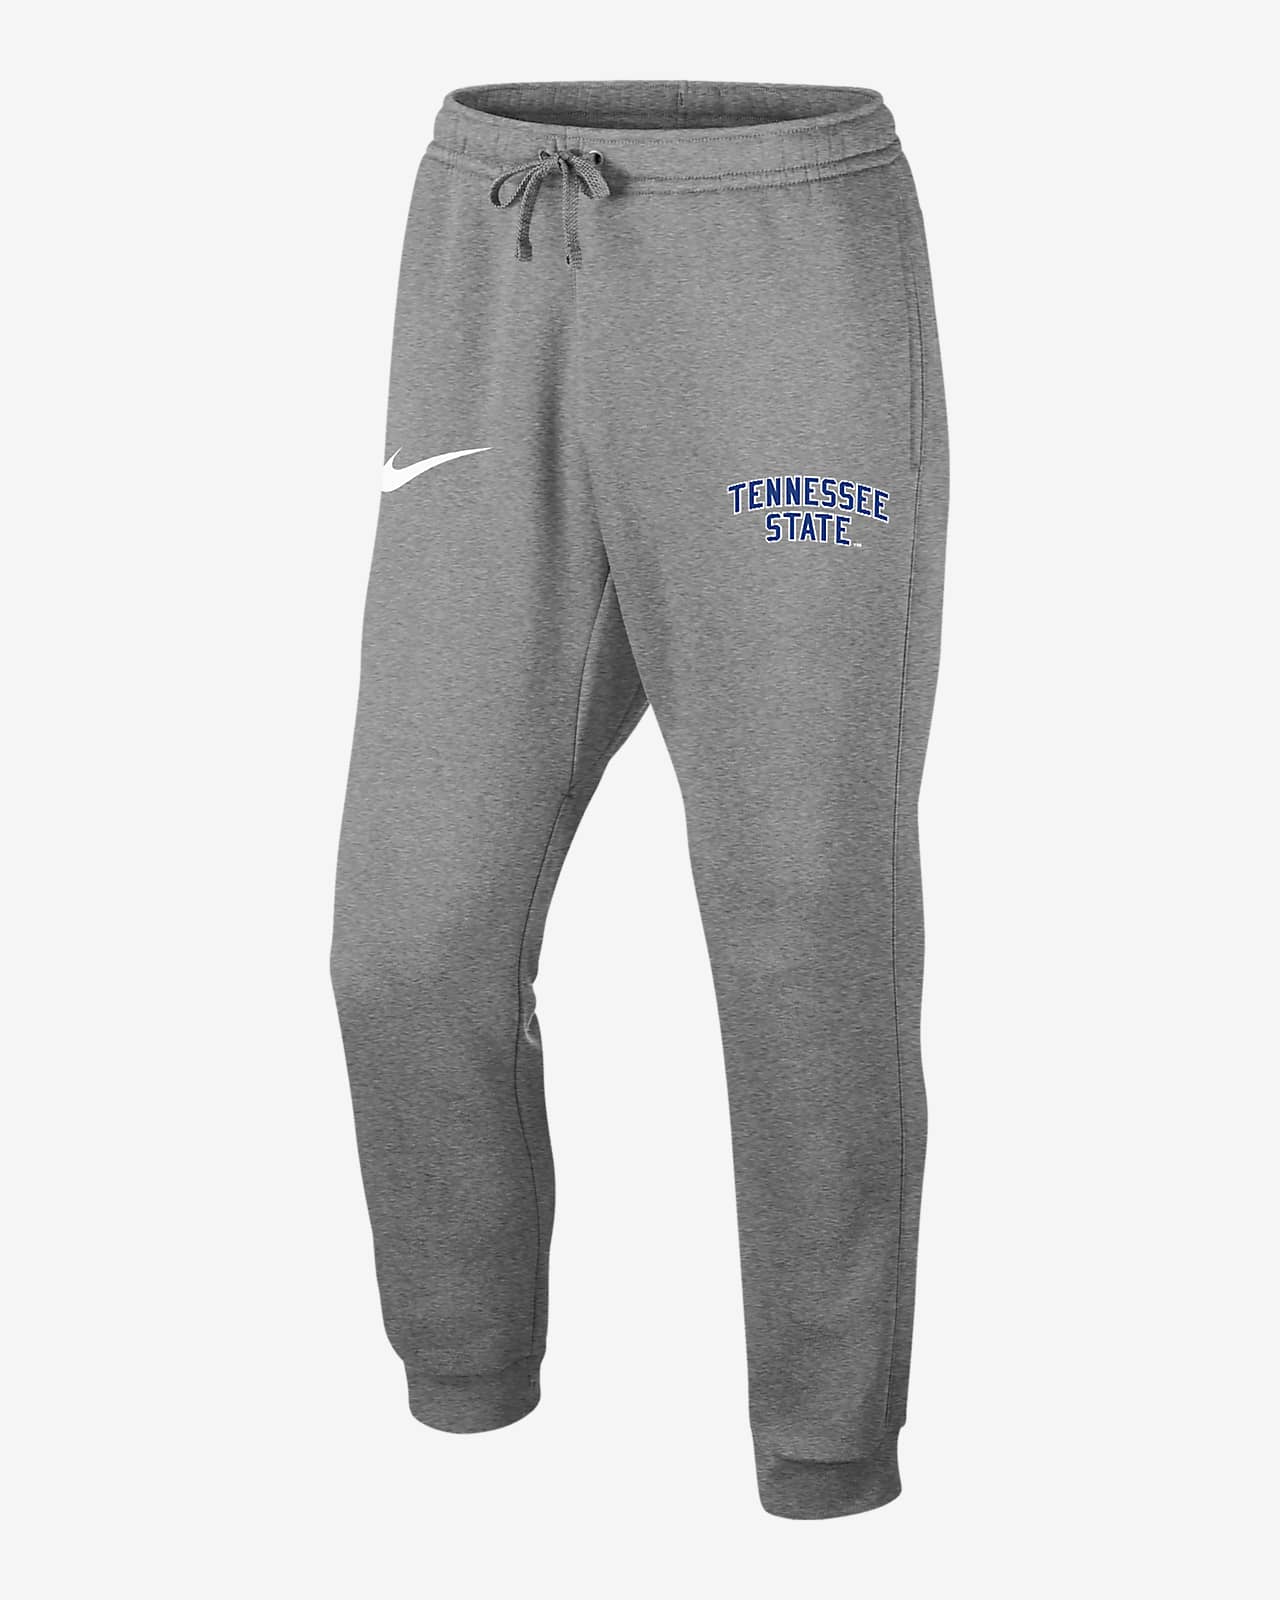 Nike College Club Fleece (Tennessee State) Joggers